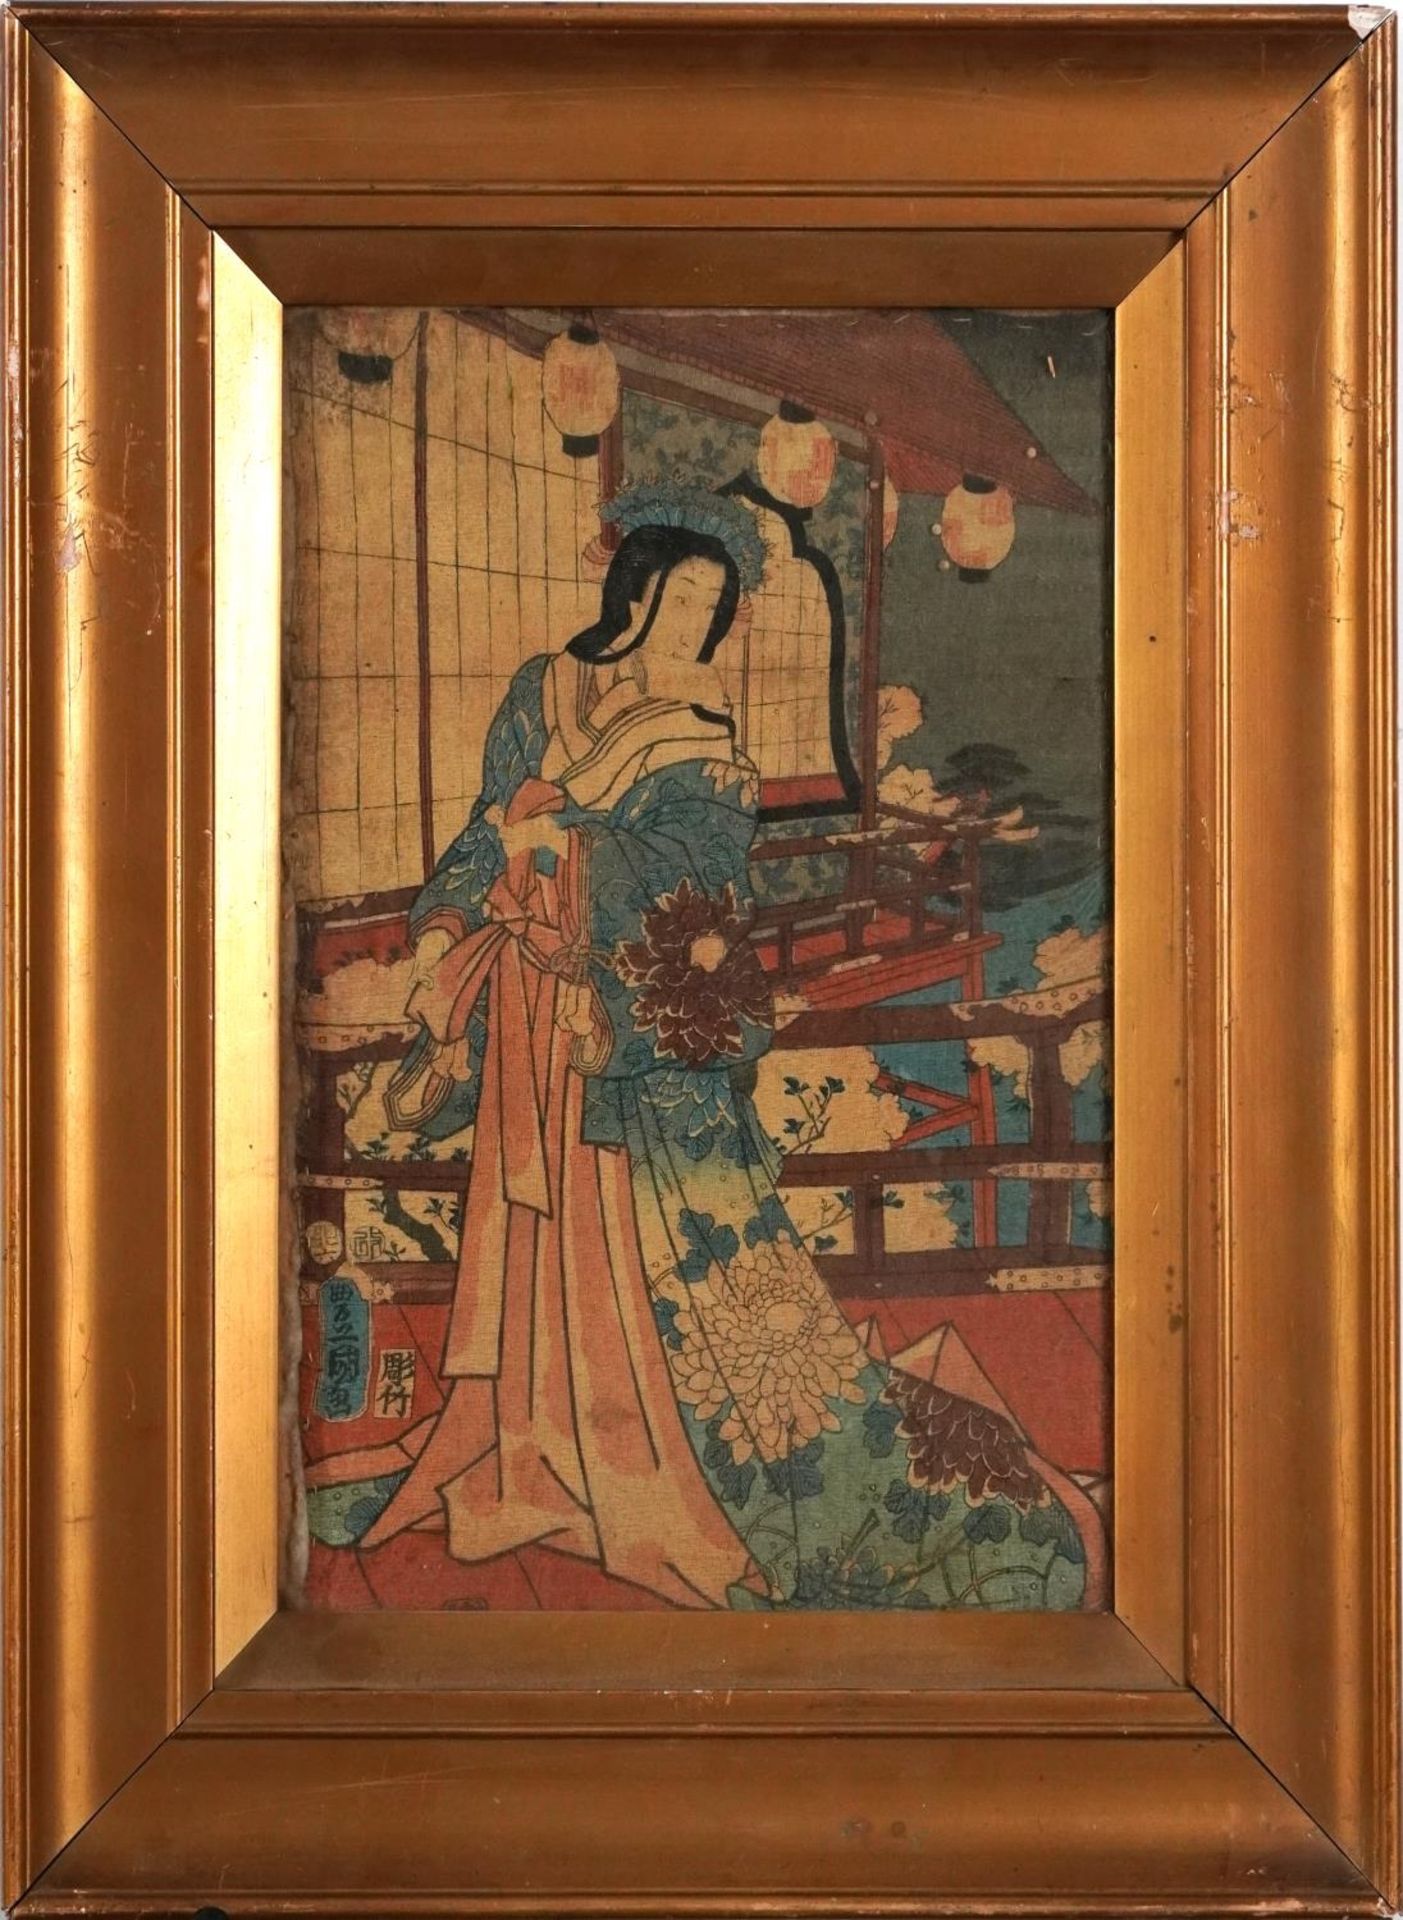 Geishas and children playing, pair of Japanese crepe paper pictures, mounted, framed and glazed, - Image 3 of 9